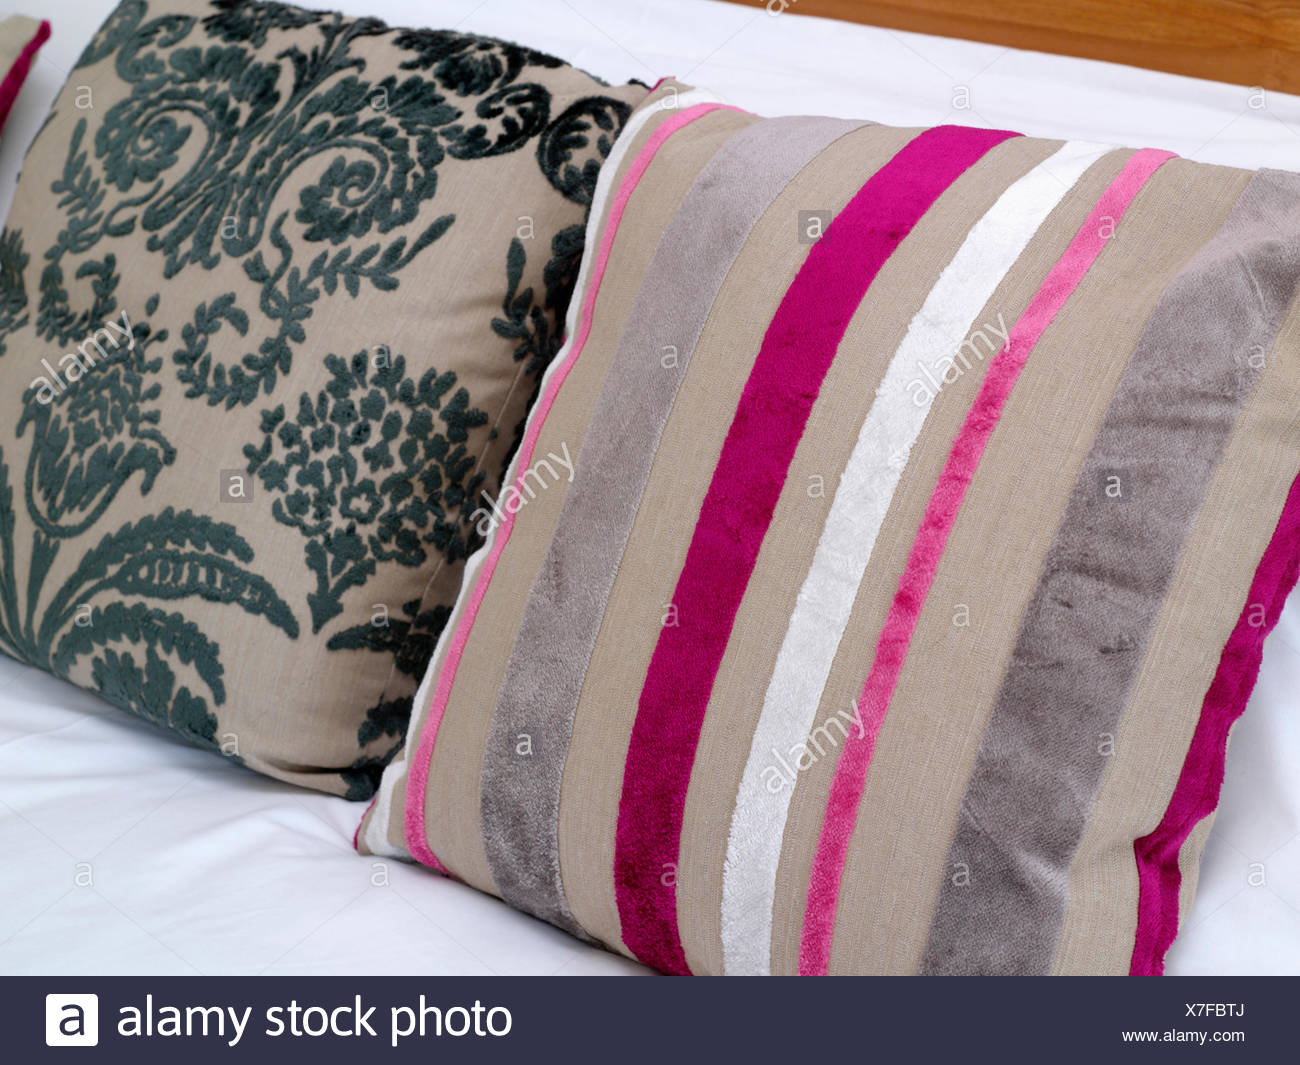 black and pink cushions